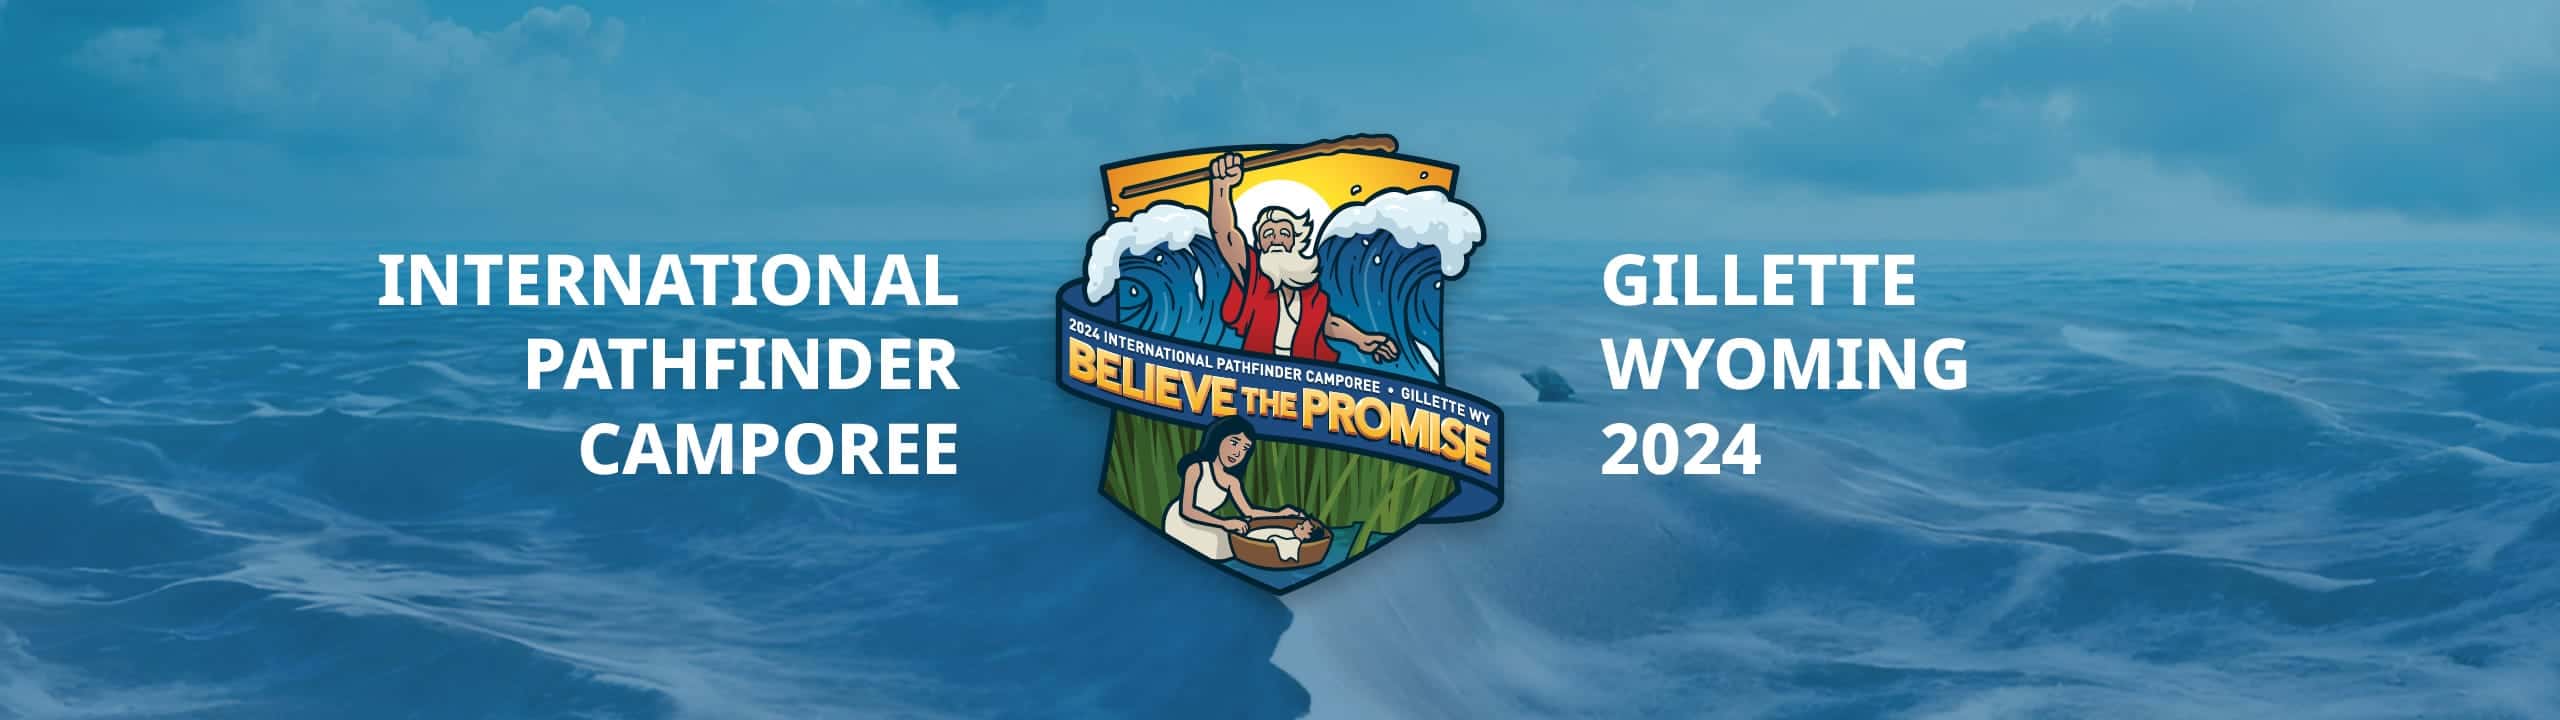 Believe the Promise Camporee Header Image